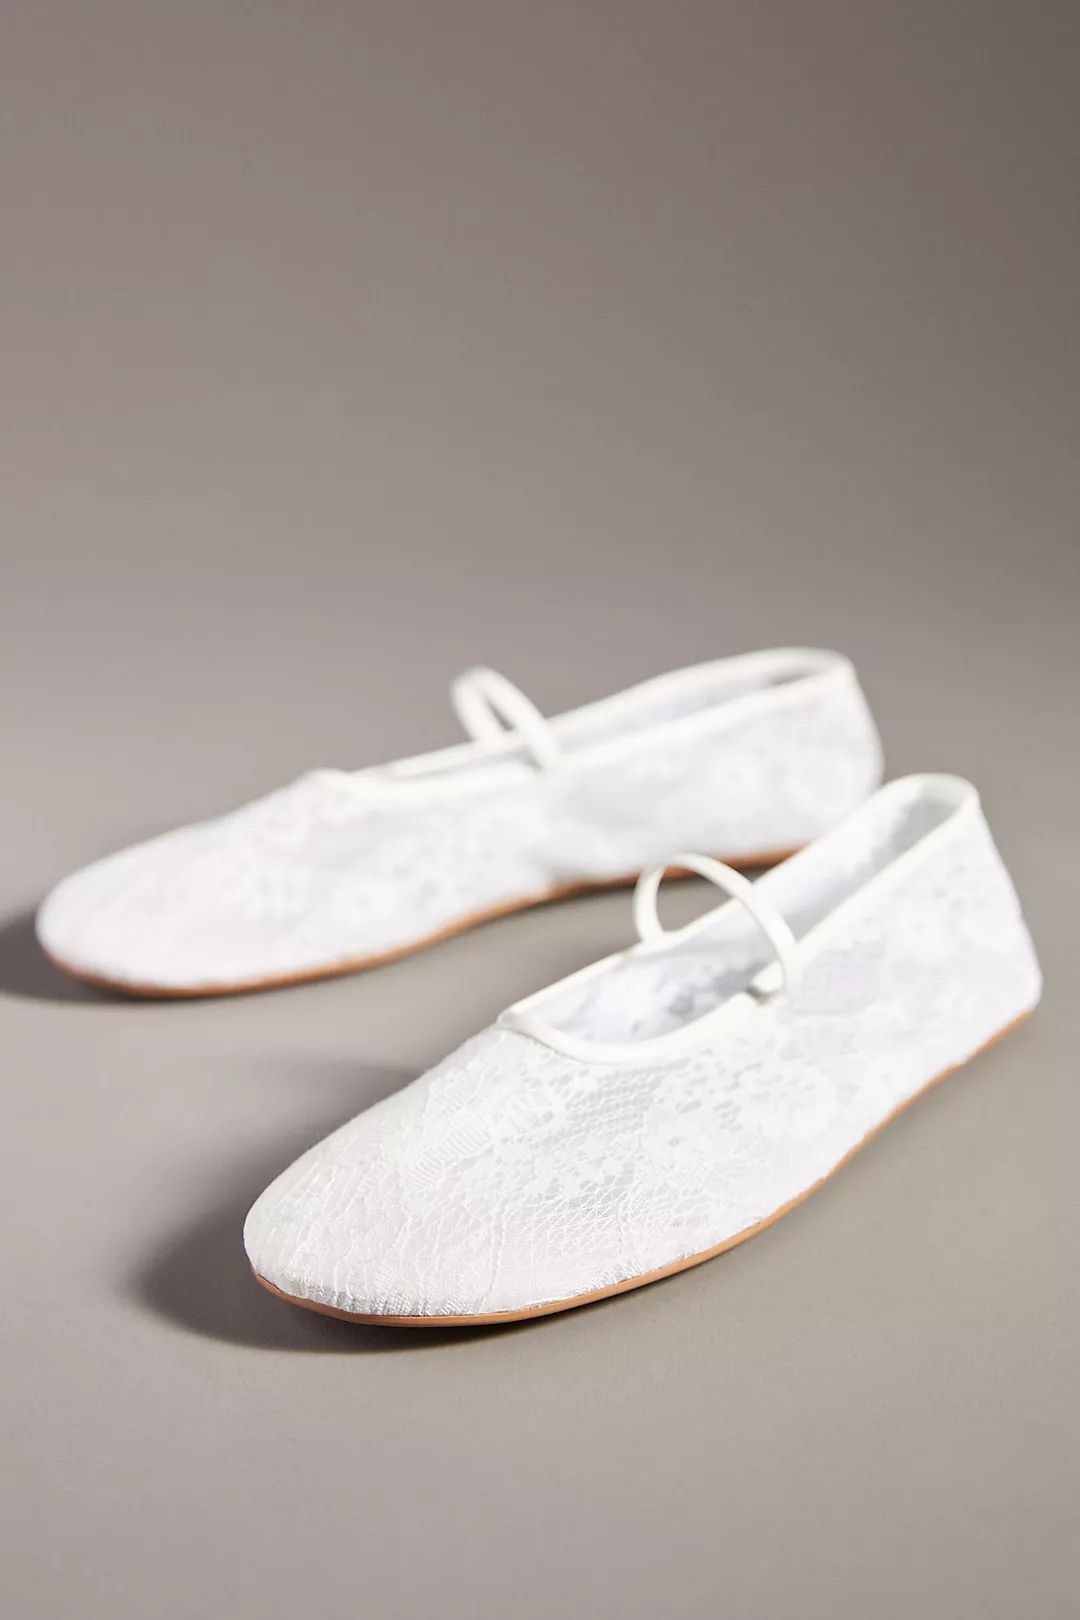 Jeffrey Campbell Swan-Lake Lace Flats | Anthropologie (US)